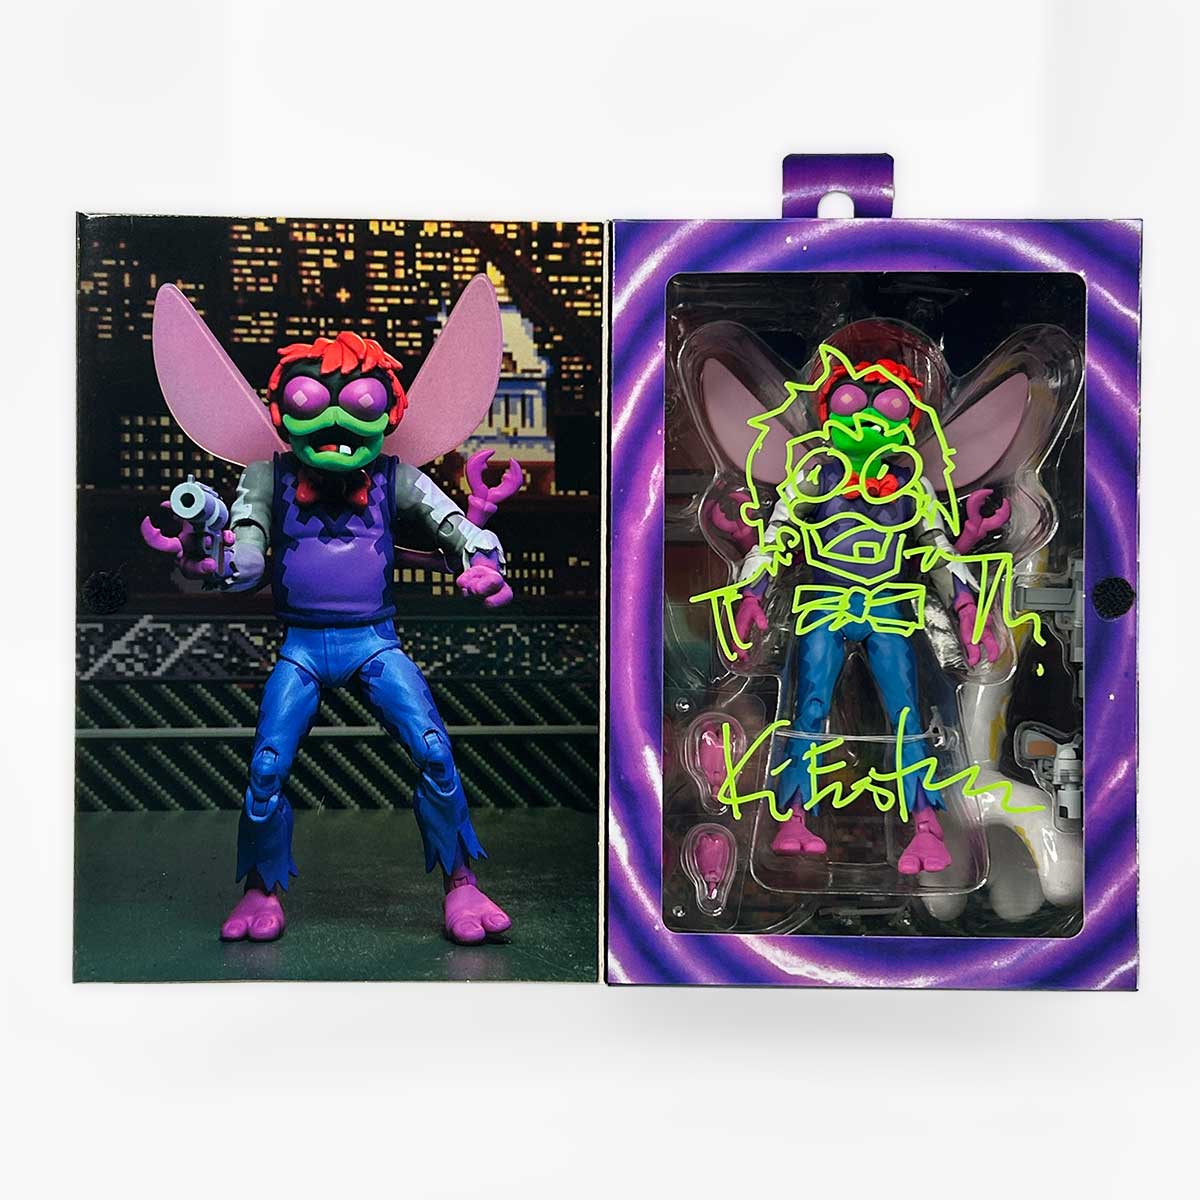 More New Stunning NECA/Loyal Subjects Figures - Signed and Sketched